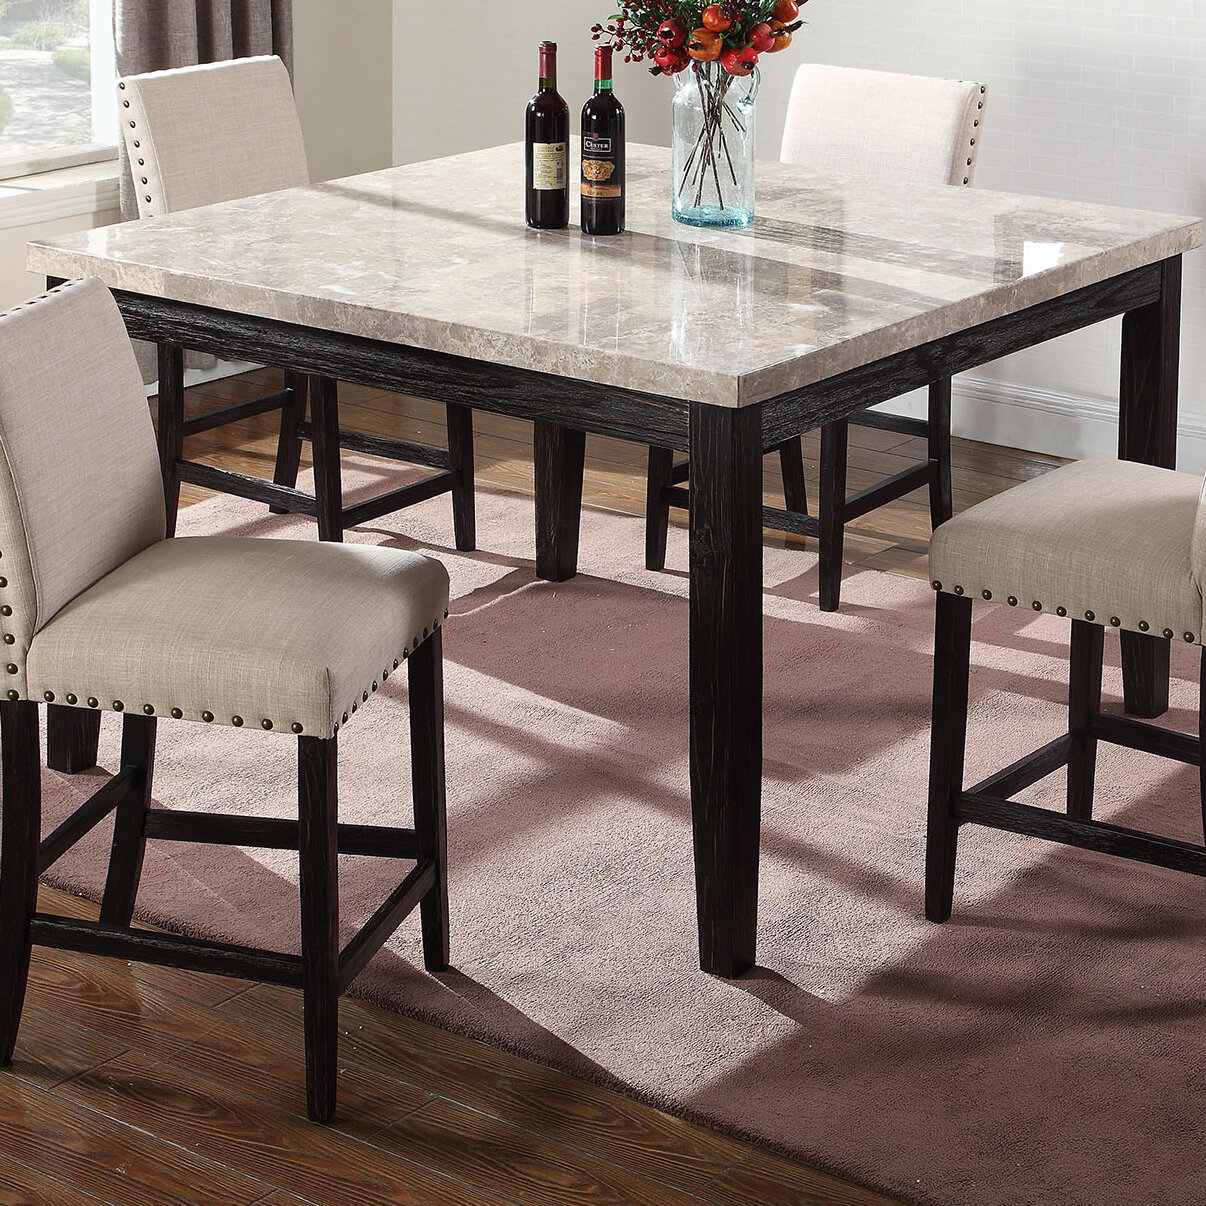 Alcott Hill Wilber Marble Counter Height Dining Table Reviews